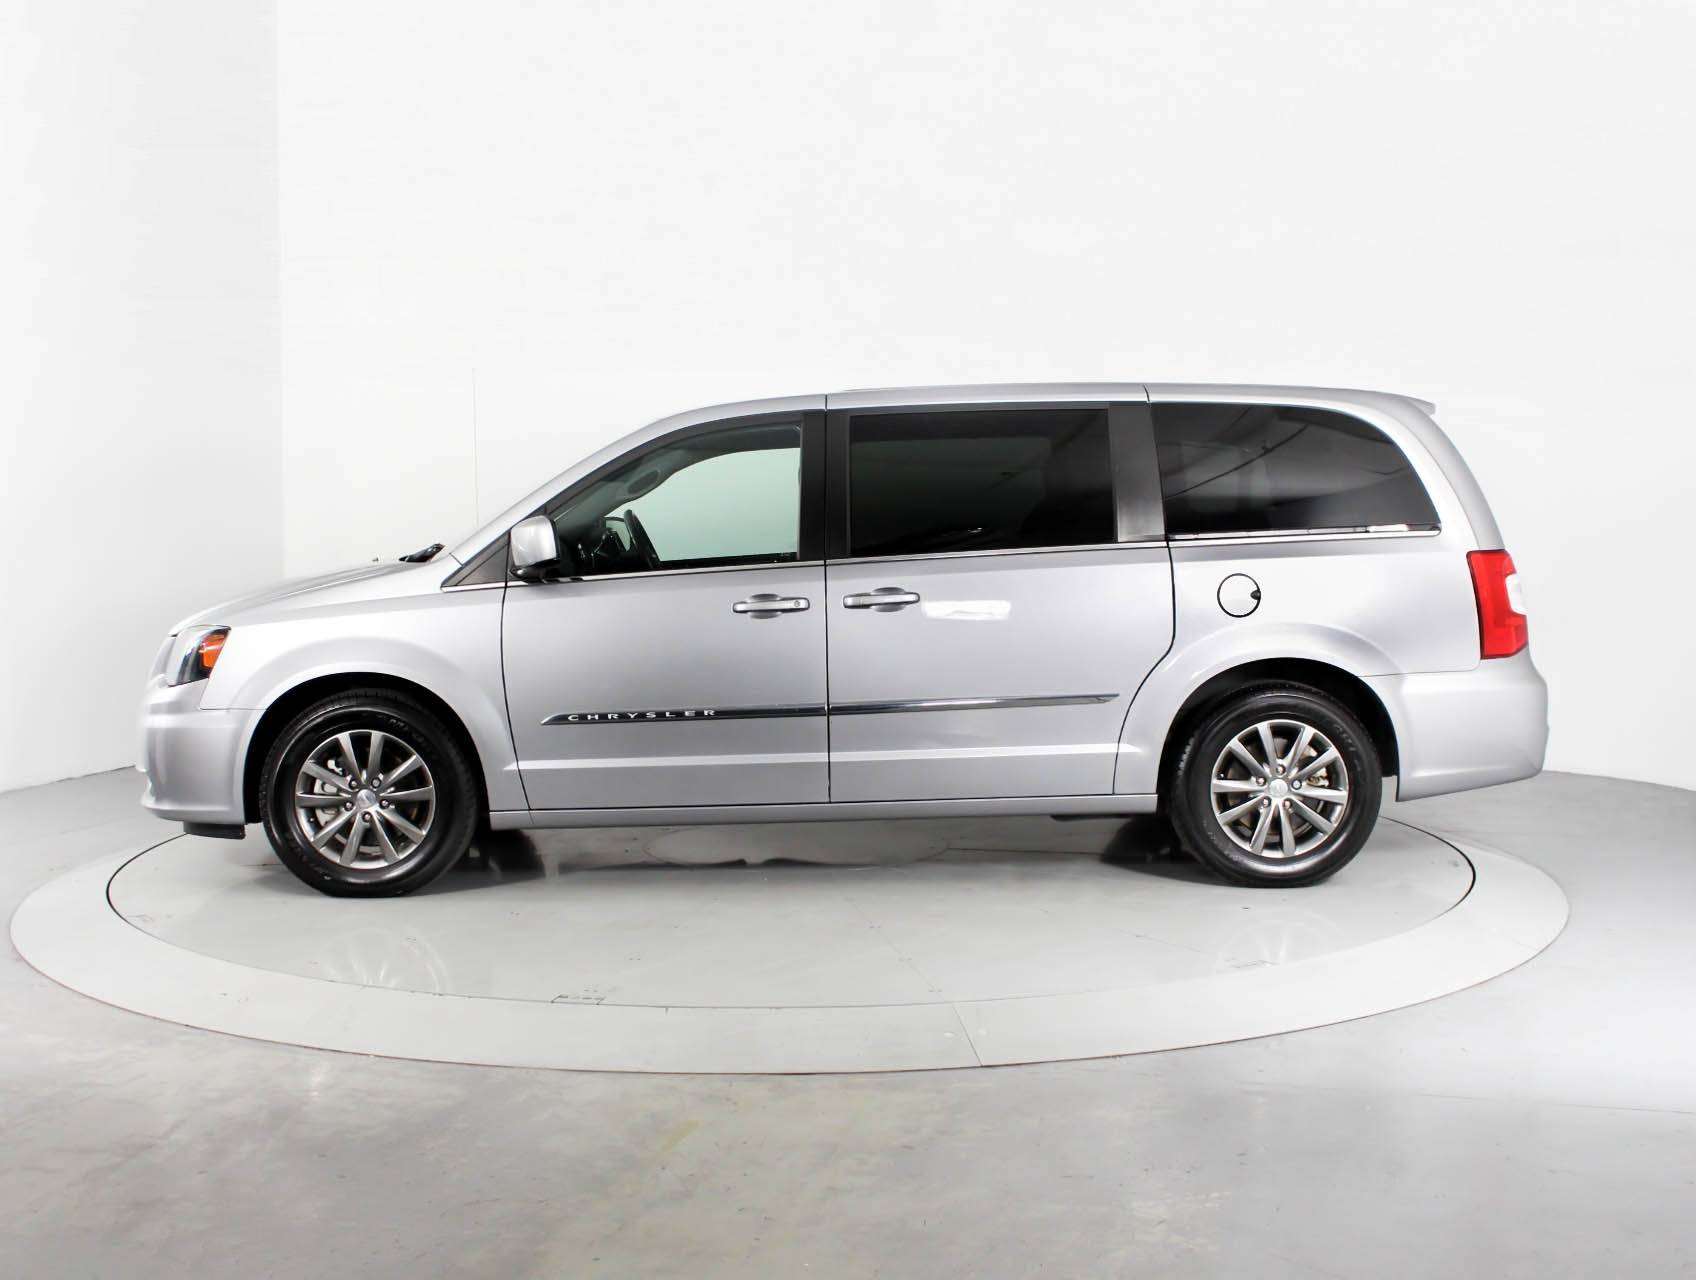 Florida Fine Cars - Used CHRYSLER TOWN & COUNTRY 2014 WEST PALM S